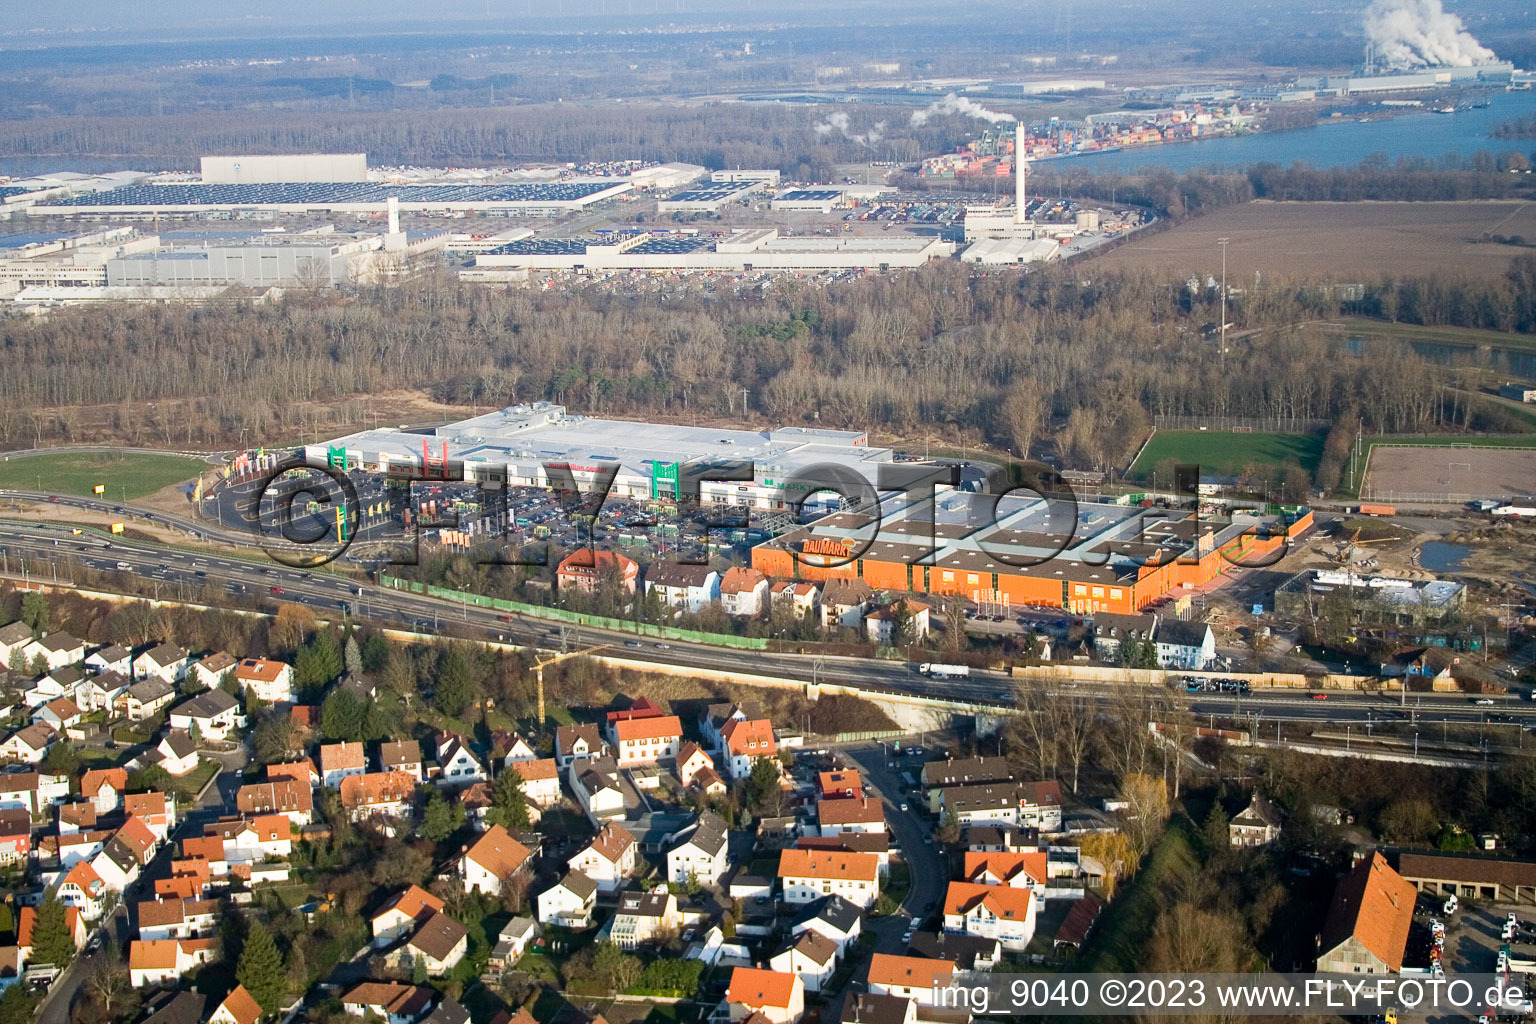 Drone image of Maximilian Center in the district Maximiliansau in Wörth am Rhein in the state Rhineland-Palatinate, Germany